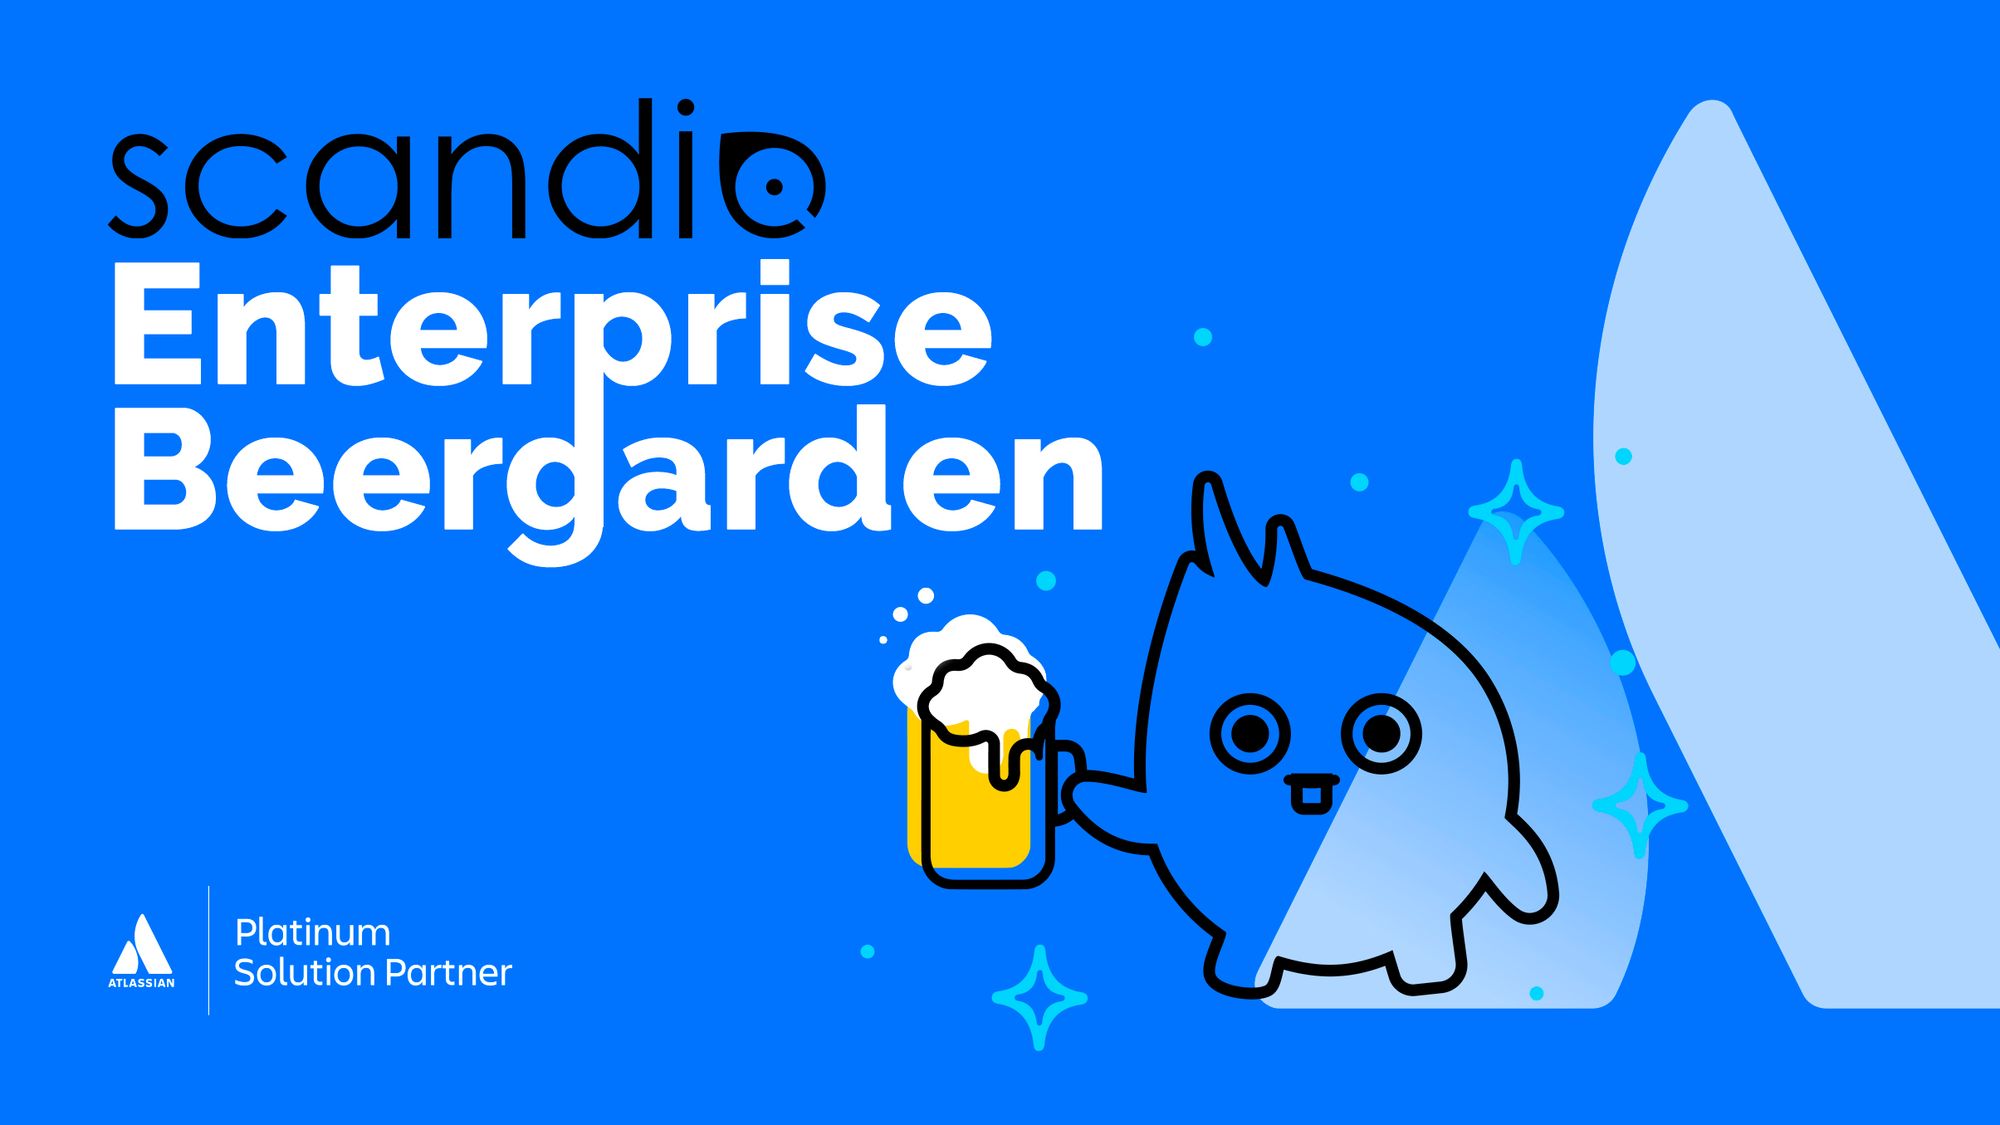 Finally it's that time again: We are hosting the 3rd Scandio Enterprise Beergarden